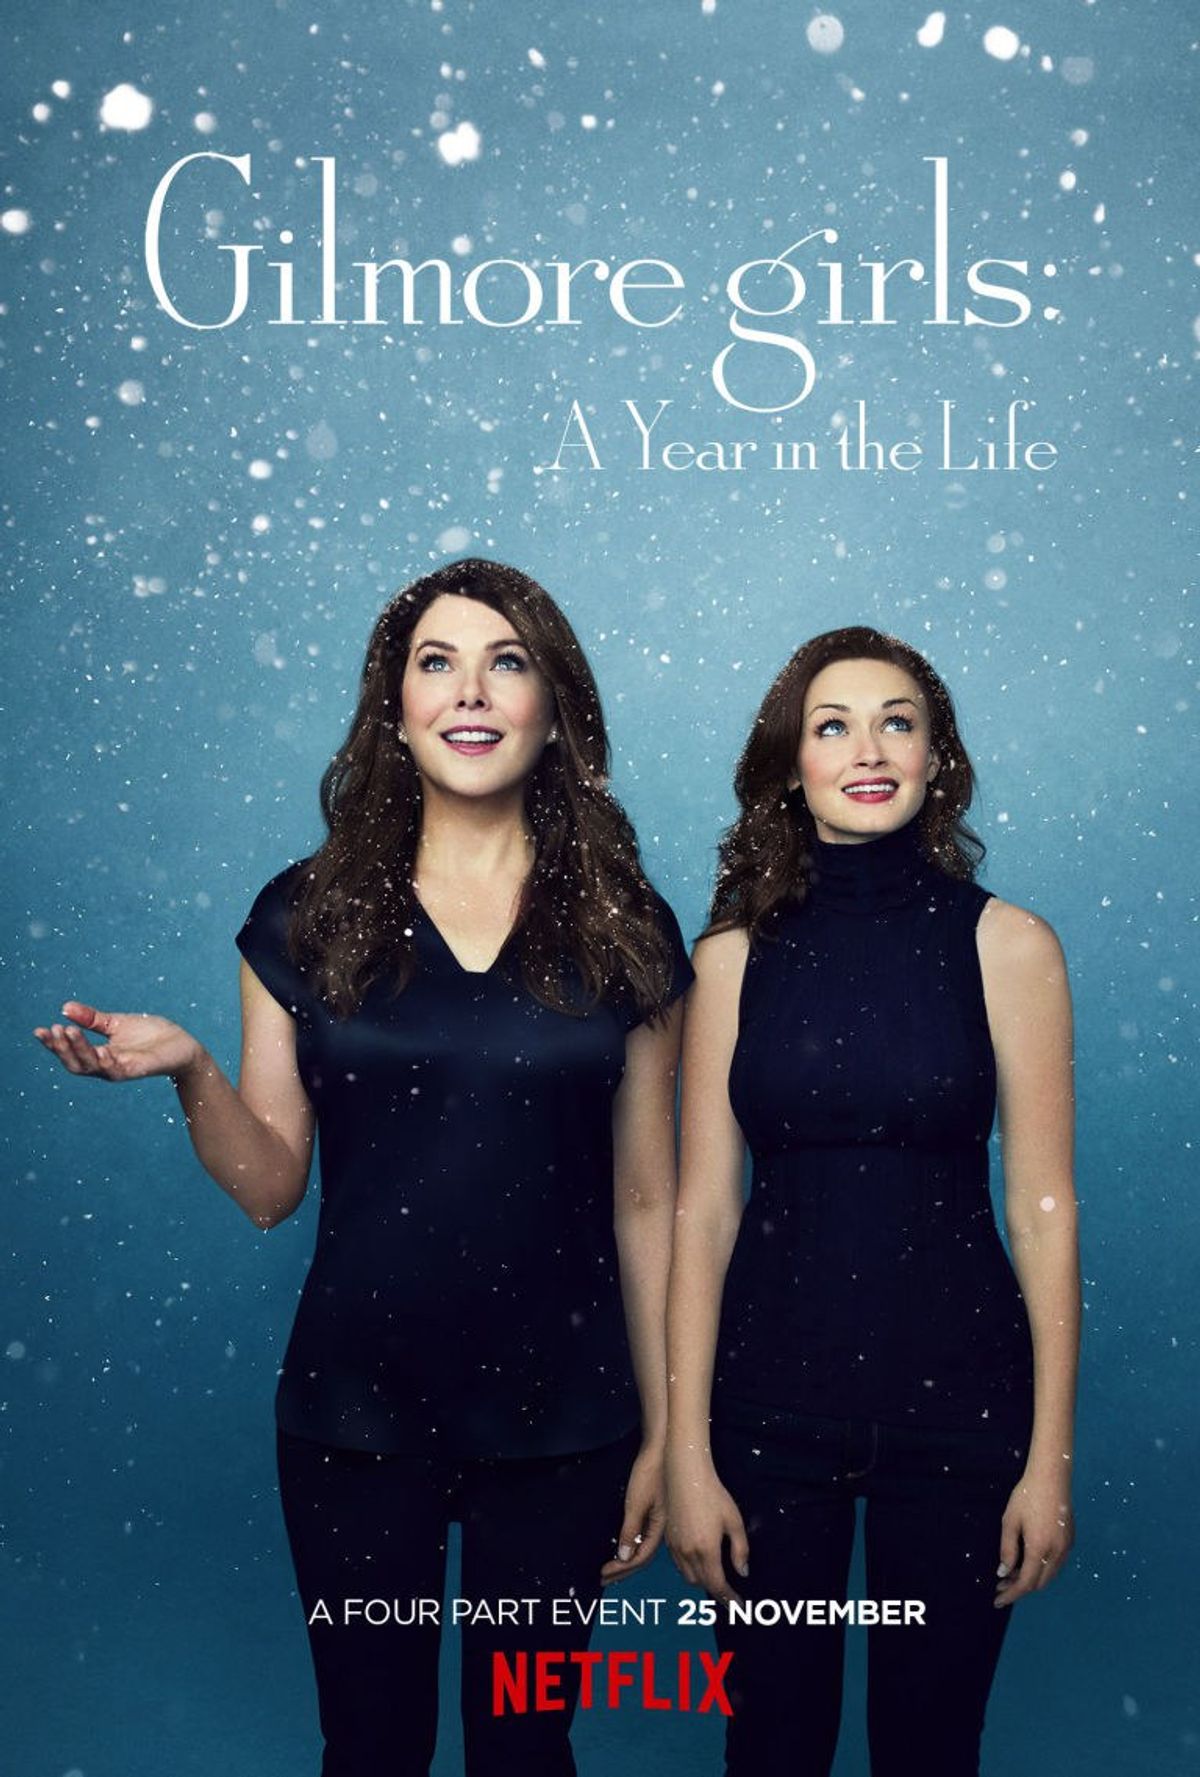 The Gilmore Girls Revival: What Each Episode Gave to Fans